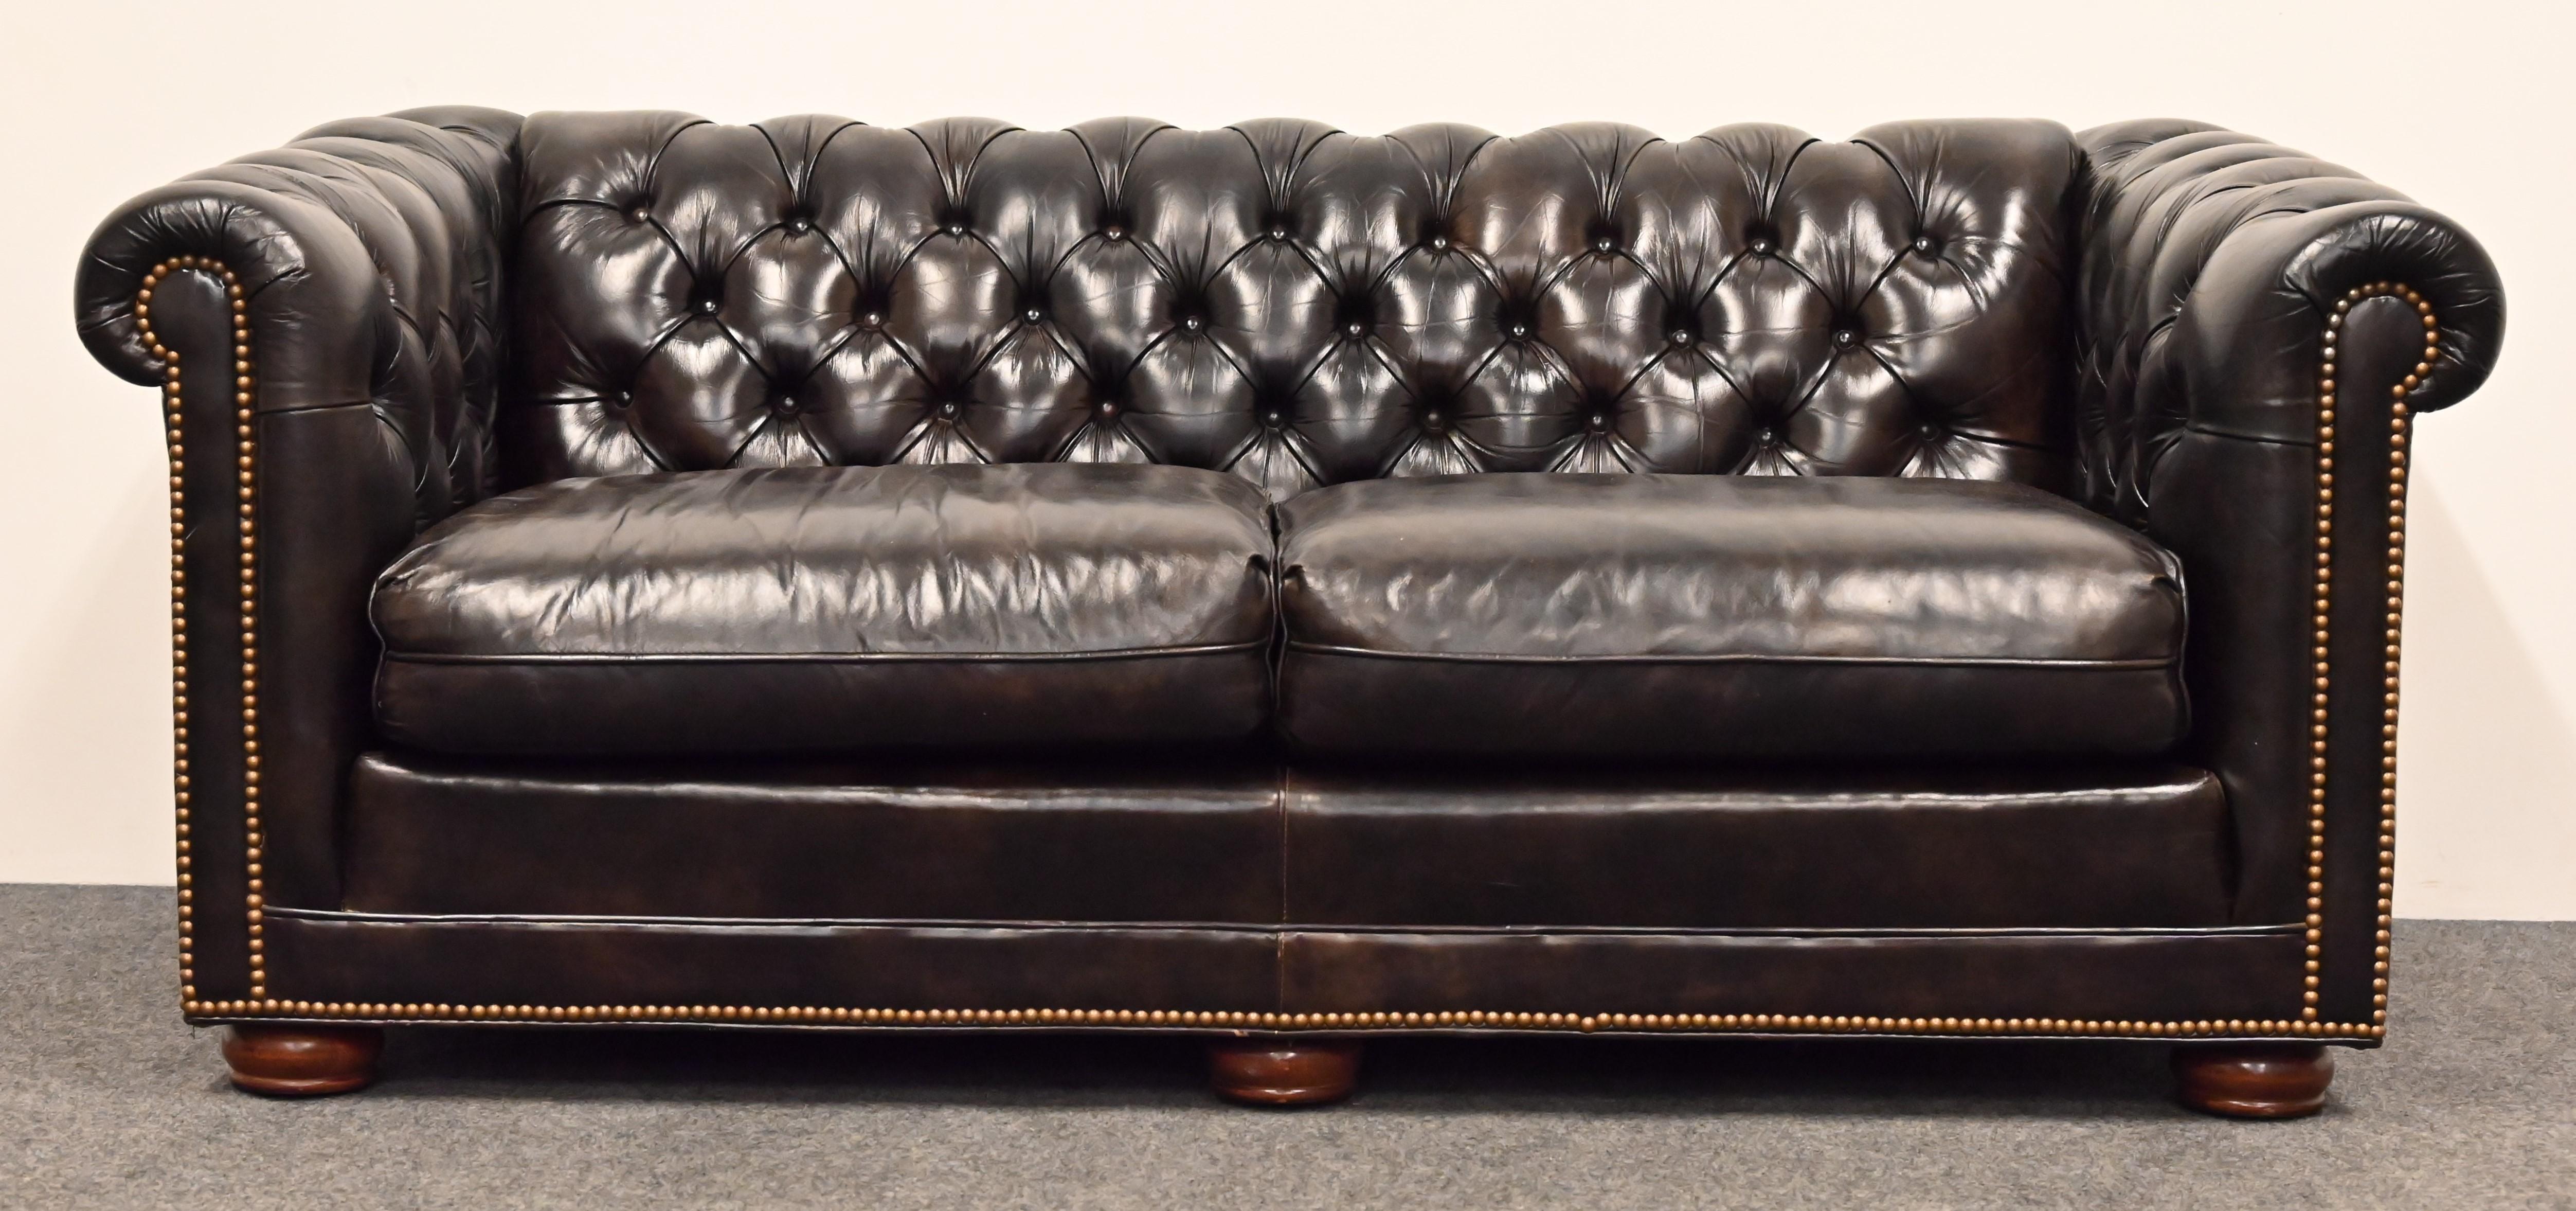 A handsome and luxurious espresso brown leather loveseat or sofa. This gorgeous settee was made by Leathercraft. The brass nailheads add a very refined touch with its solid maple wood bun feet and rolled arms and tufted seat. Would look good in any